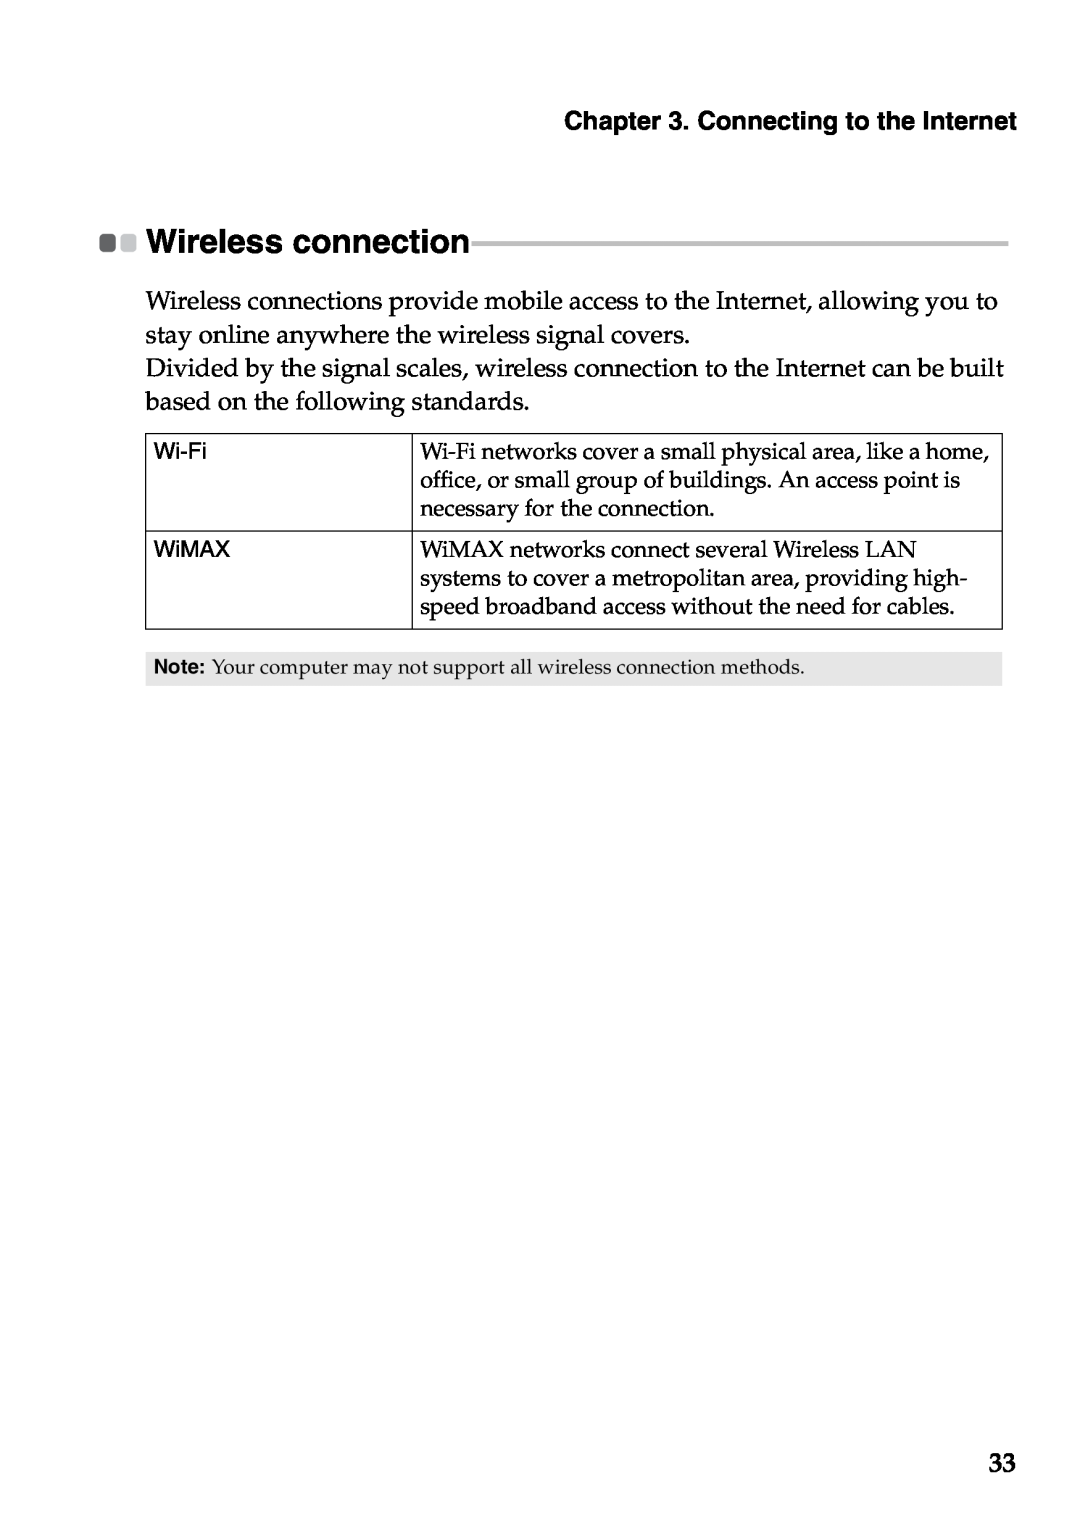 Lenovo Z470, Z370, Z570 manual Wireless connection, Connecting to the Internet, Wi-Fi WiMAX 